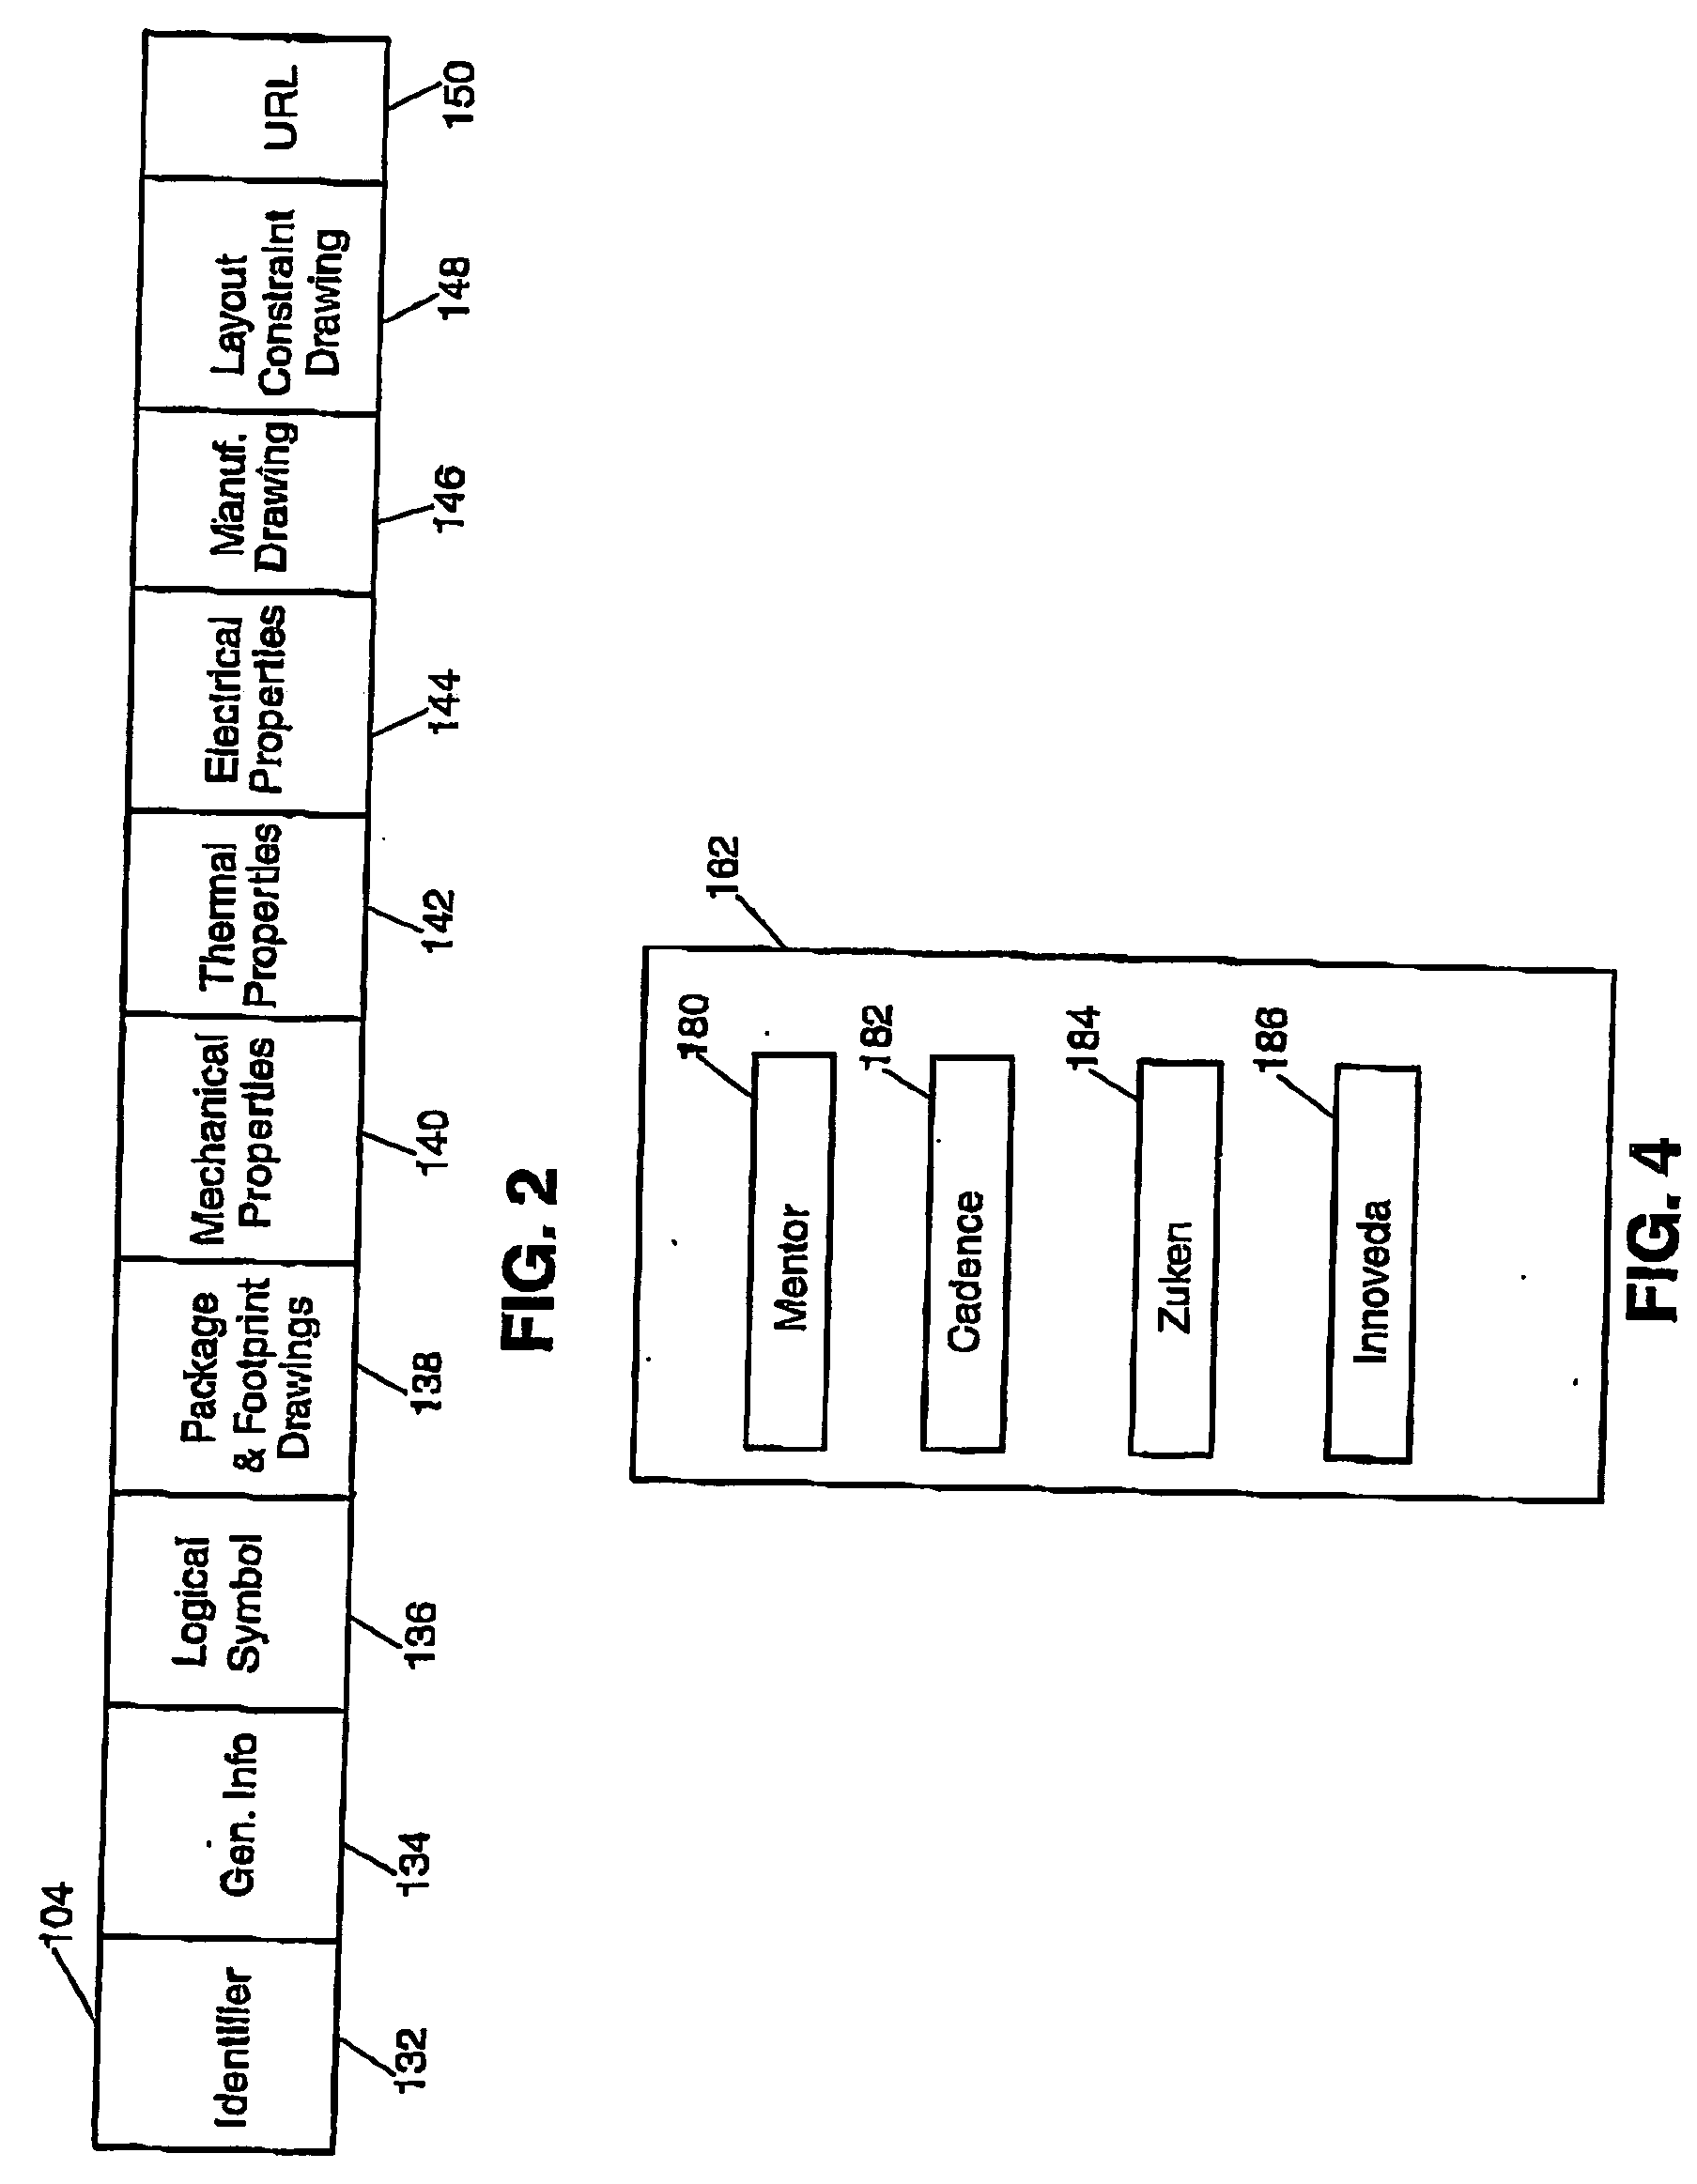 System, method, and computer program product for network-based part management system